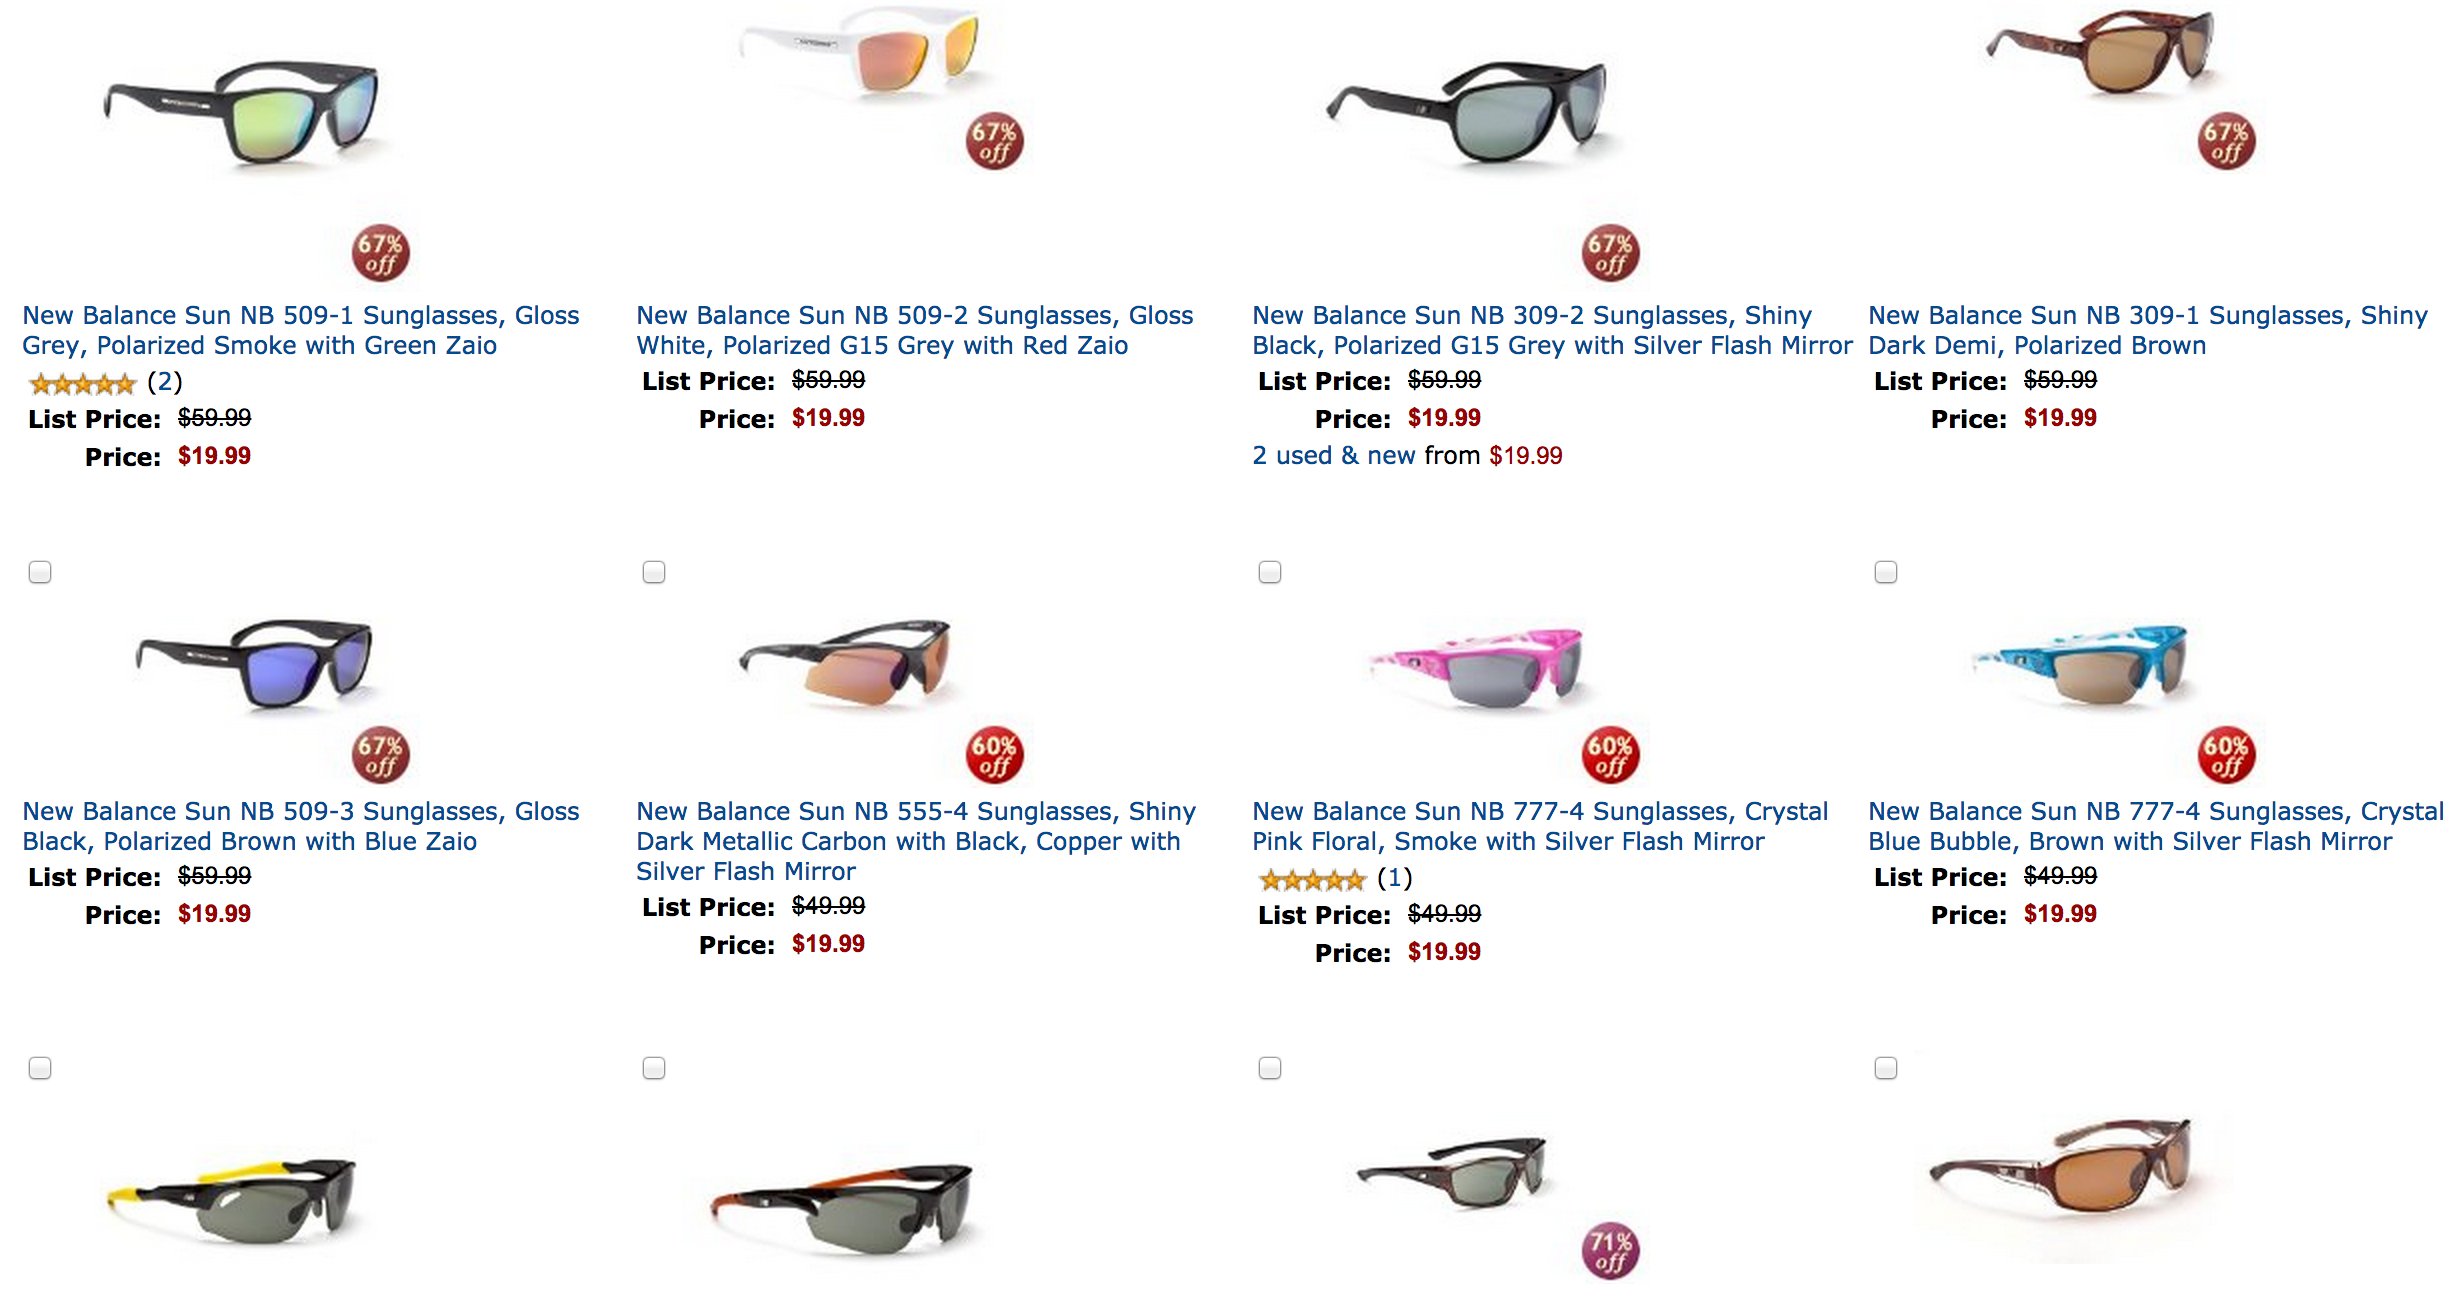 Today Only: New Balance Sunglasses 50% Off Or More - Running with Miles